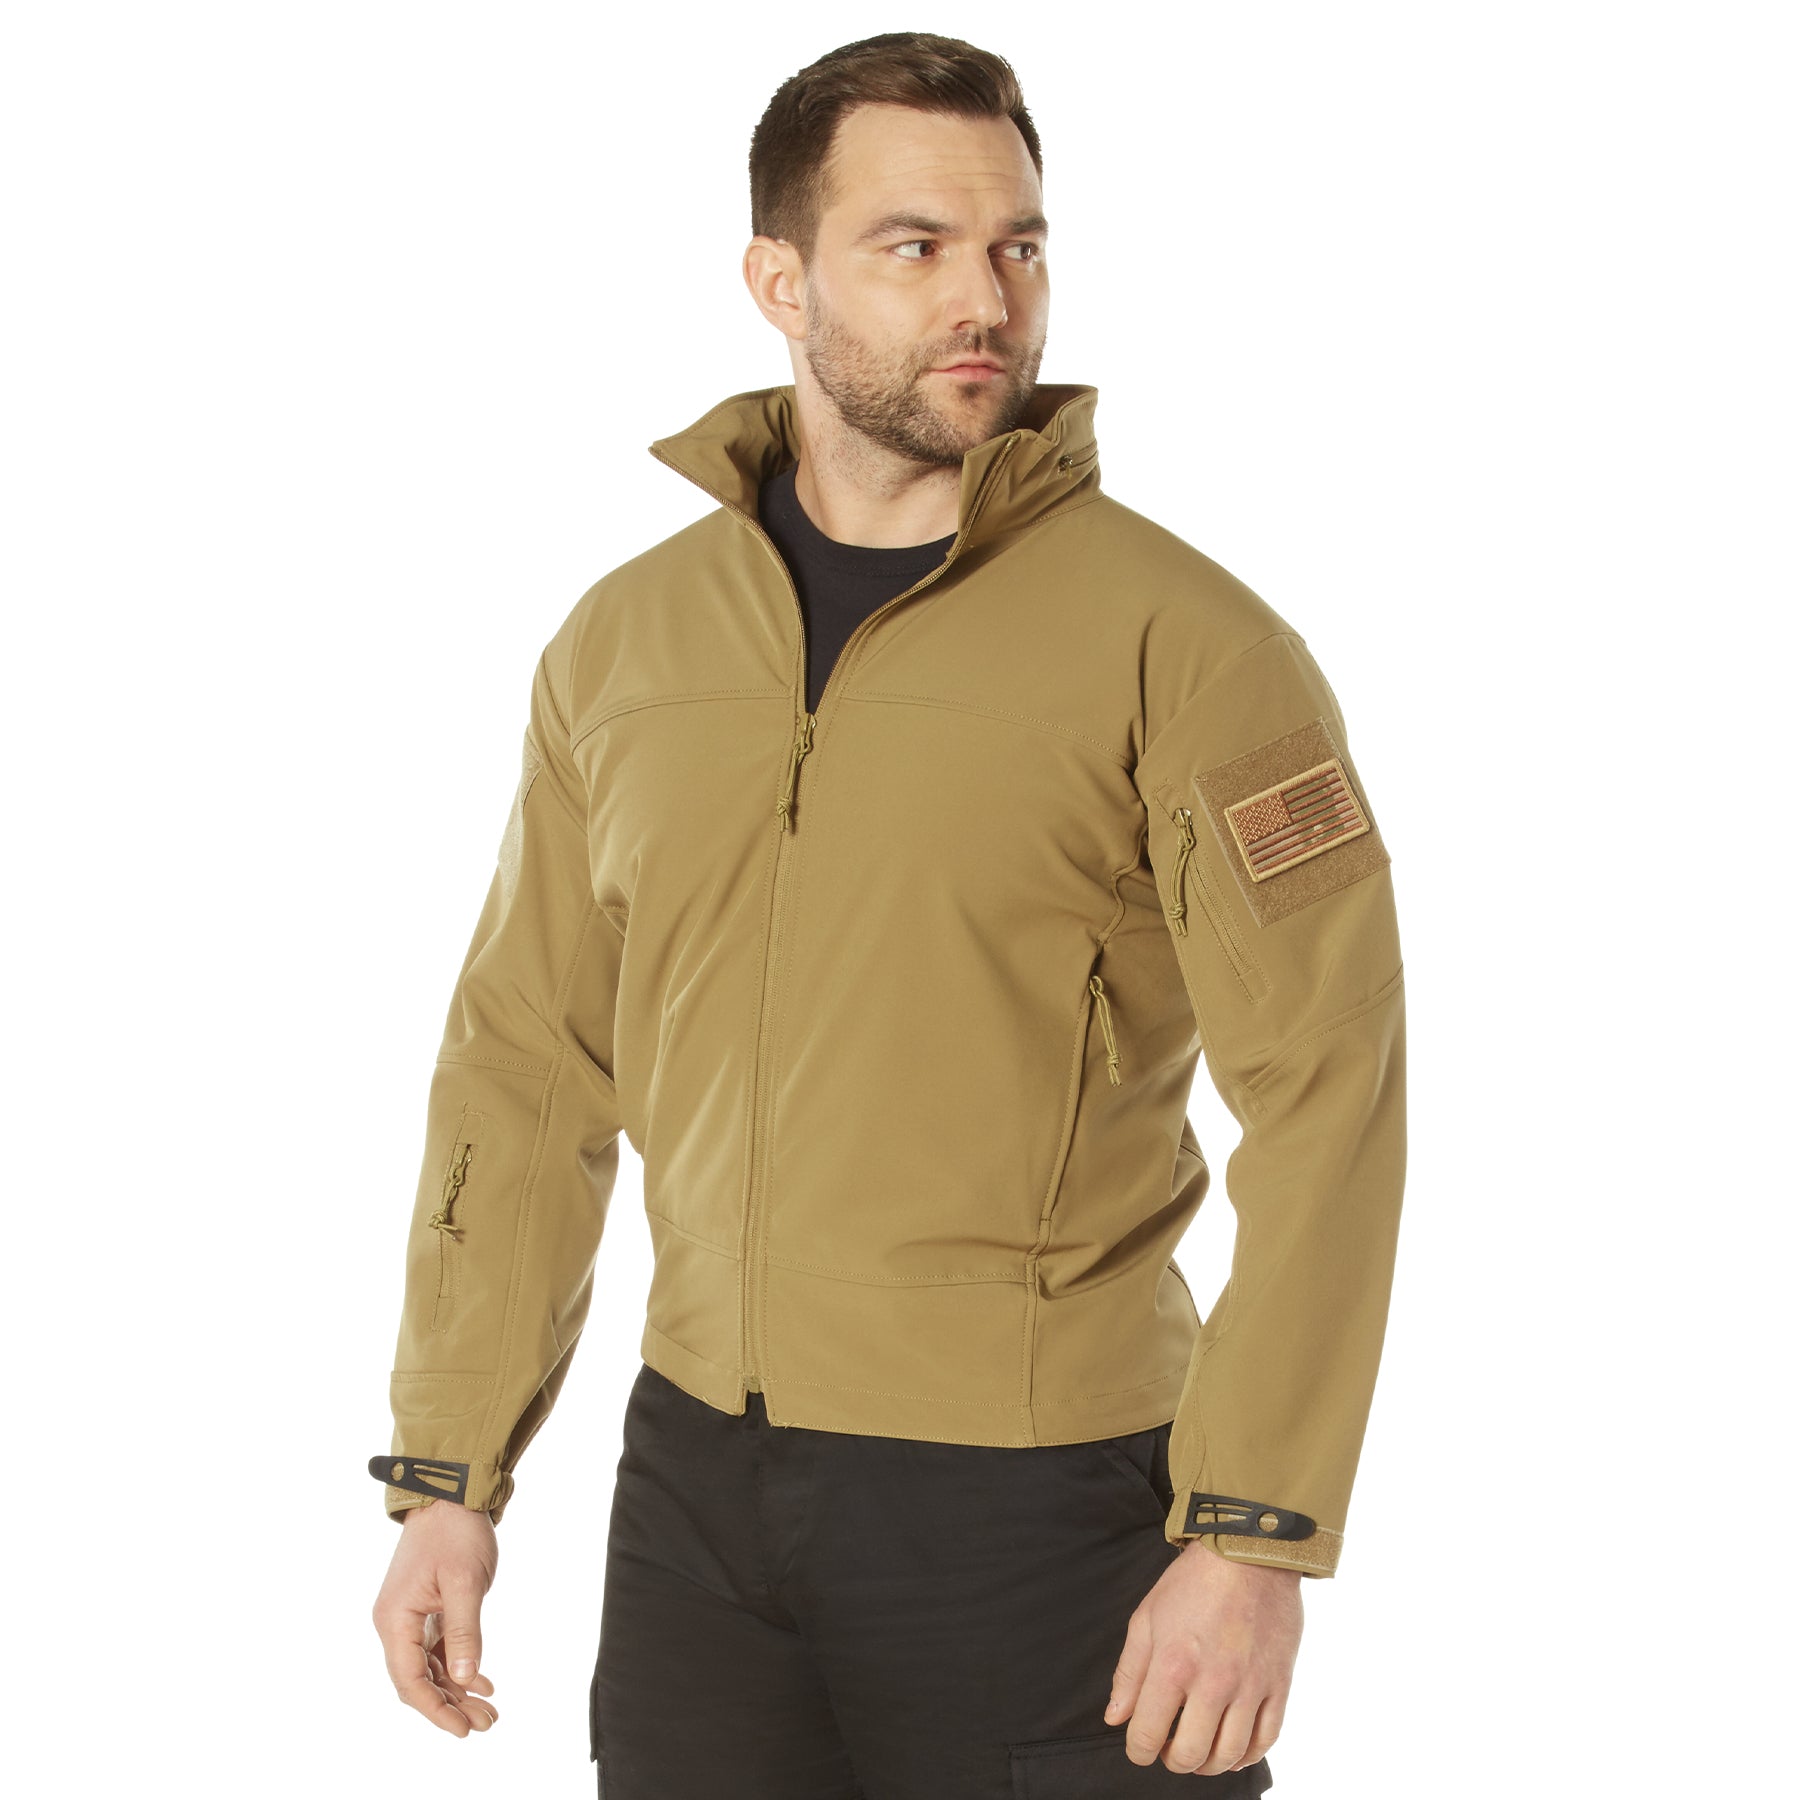 Poly Covert Spec Ops Lightweight Soft Shell Jackets Coyote Brown